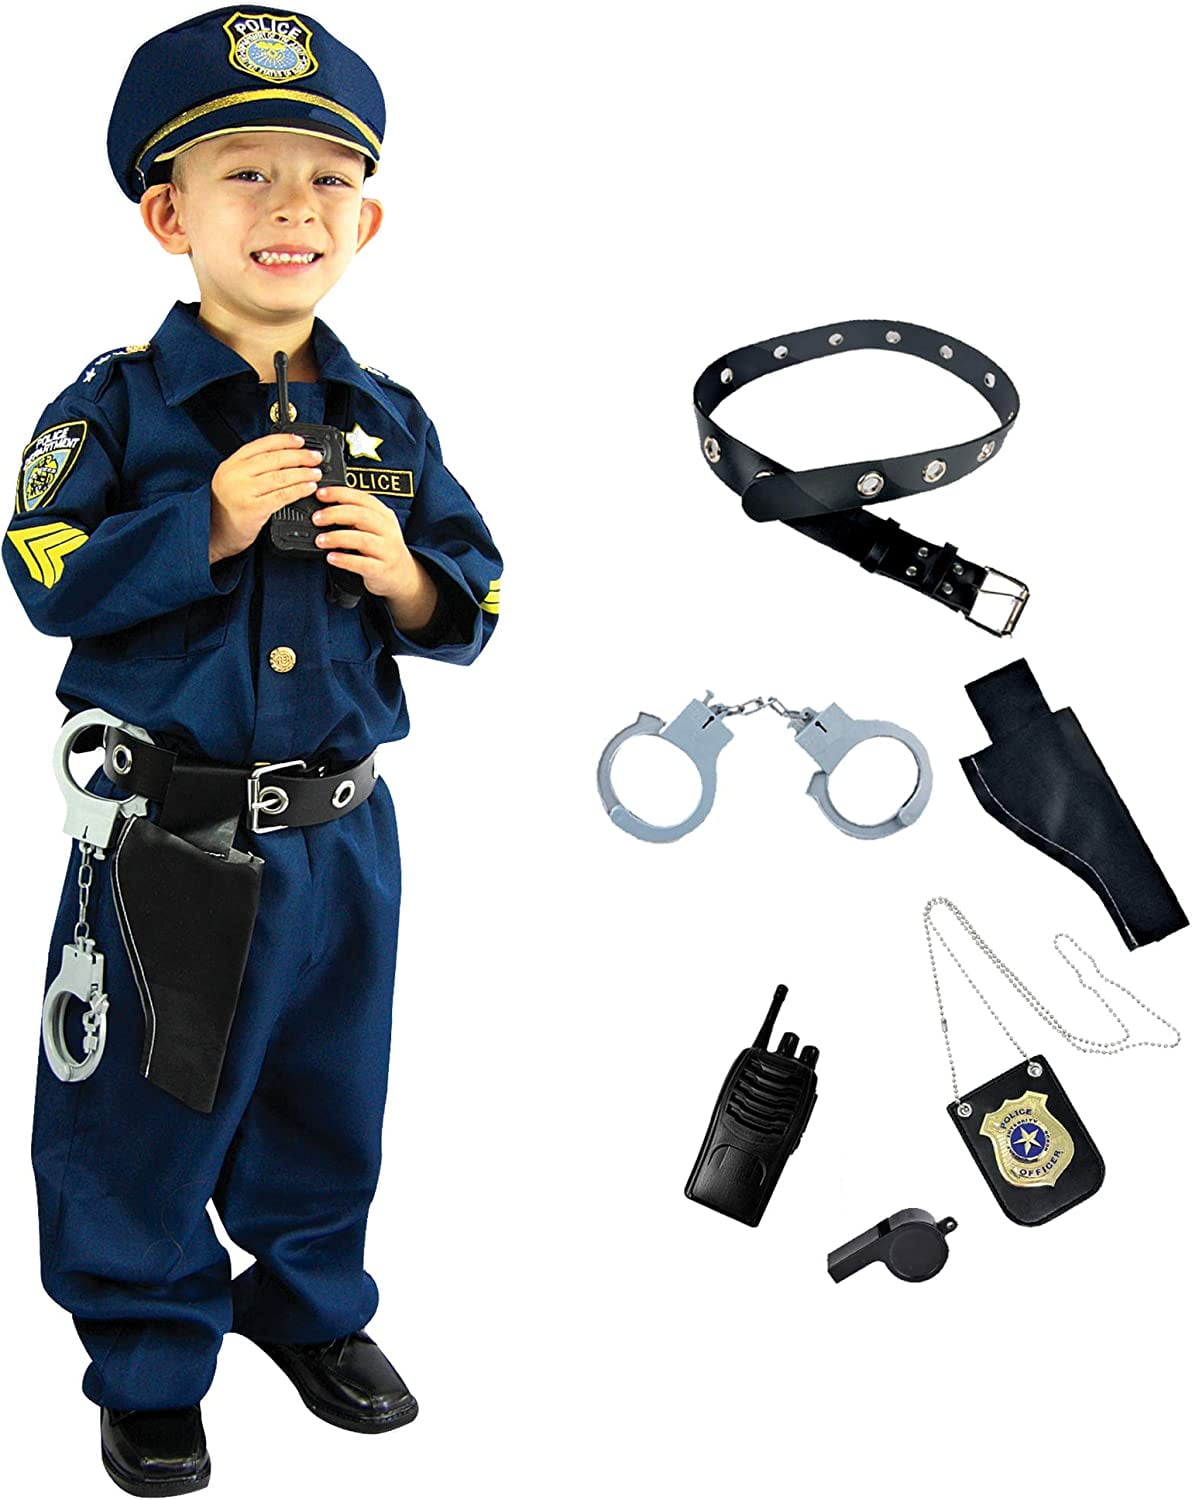 2pcs/Set Toys Police Handcuff Pranks Role Play Police Officer Pretend Props 